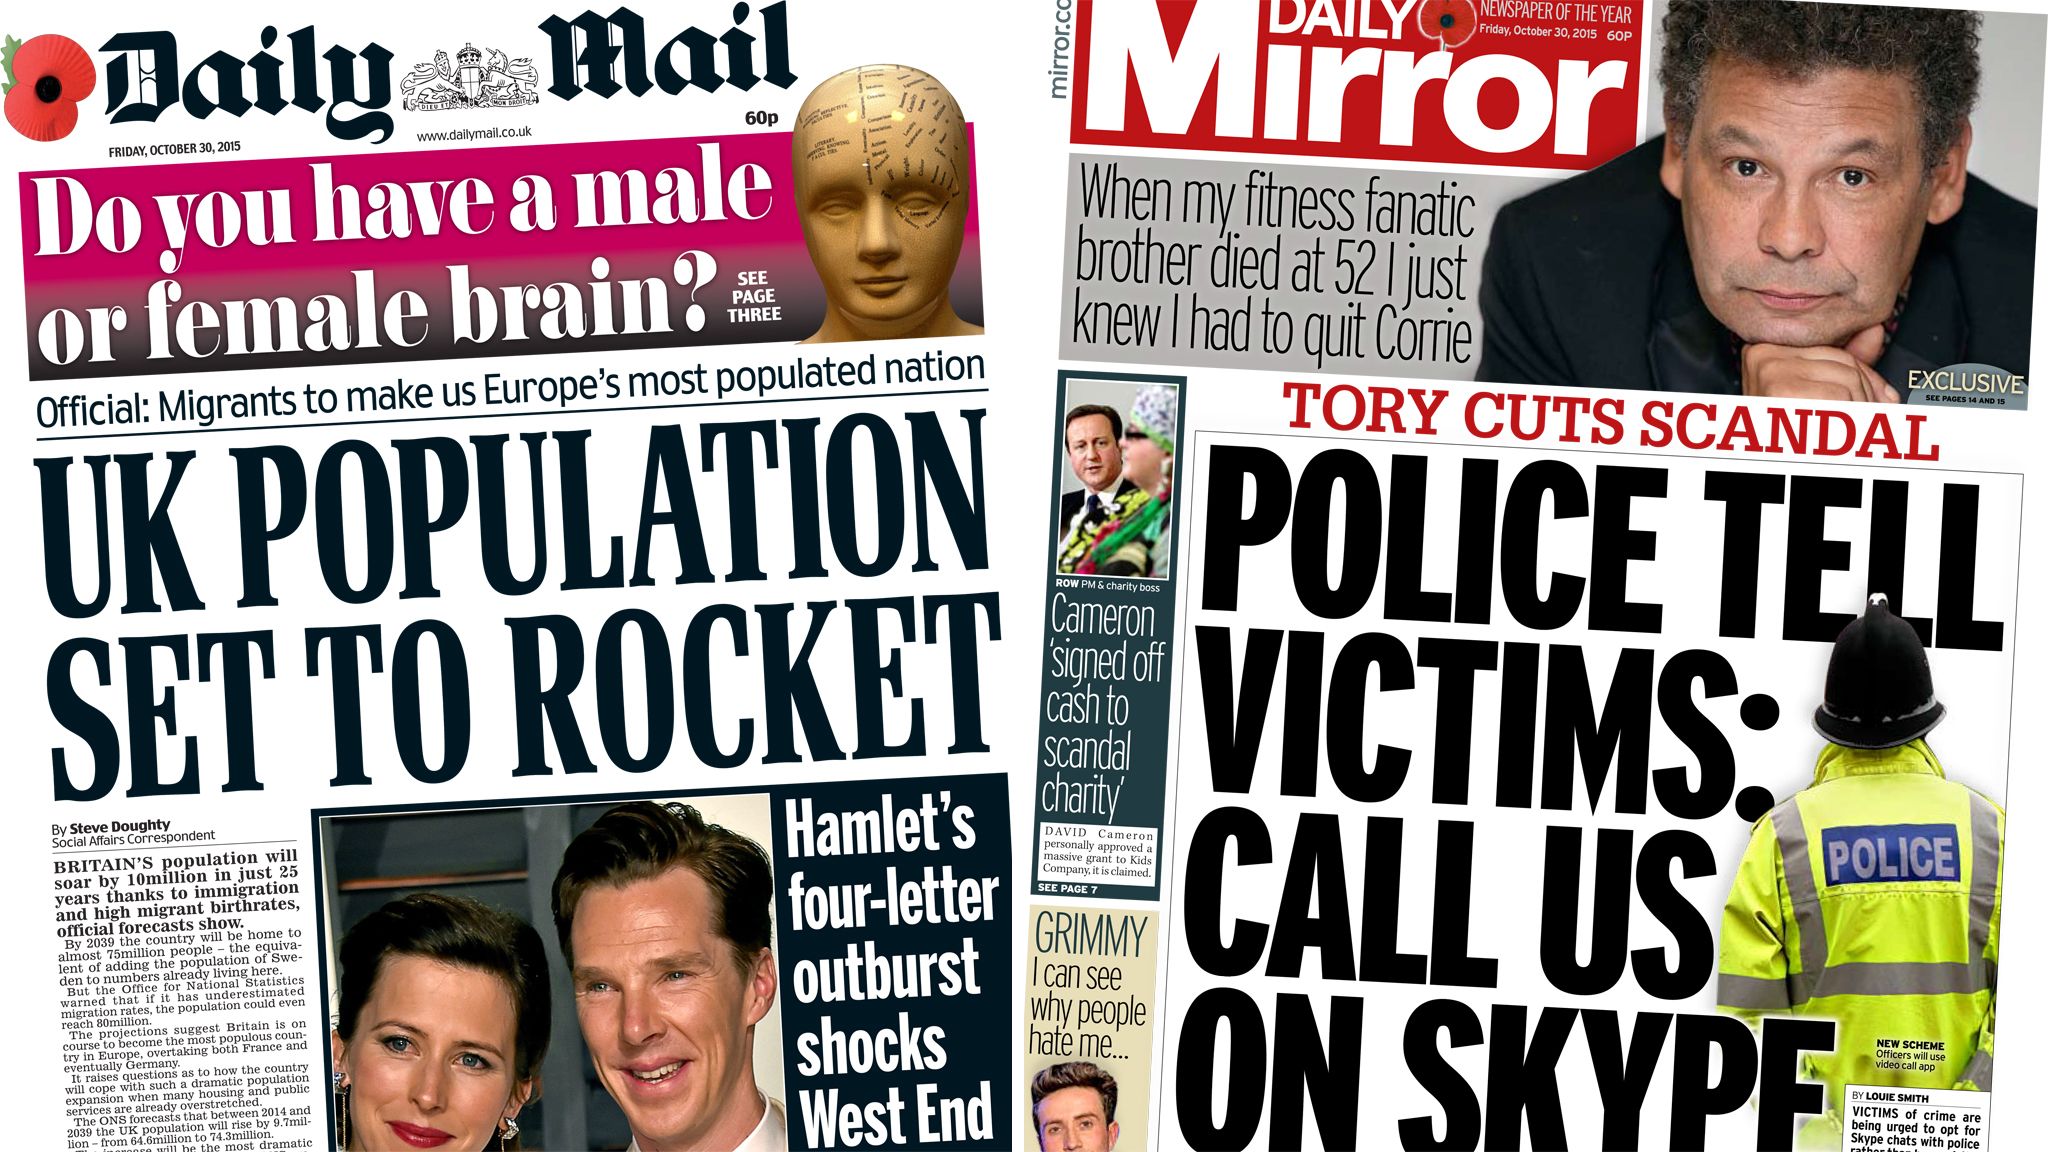 Daily Mail and Daily Mirror front pages - 30/10/15